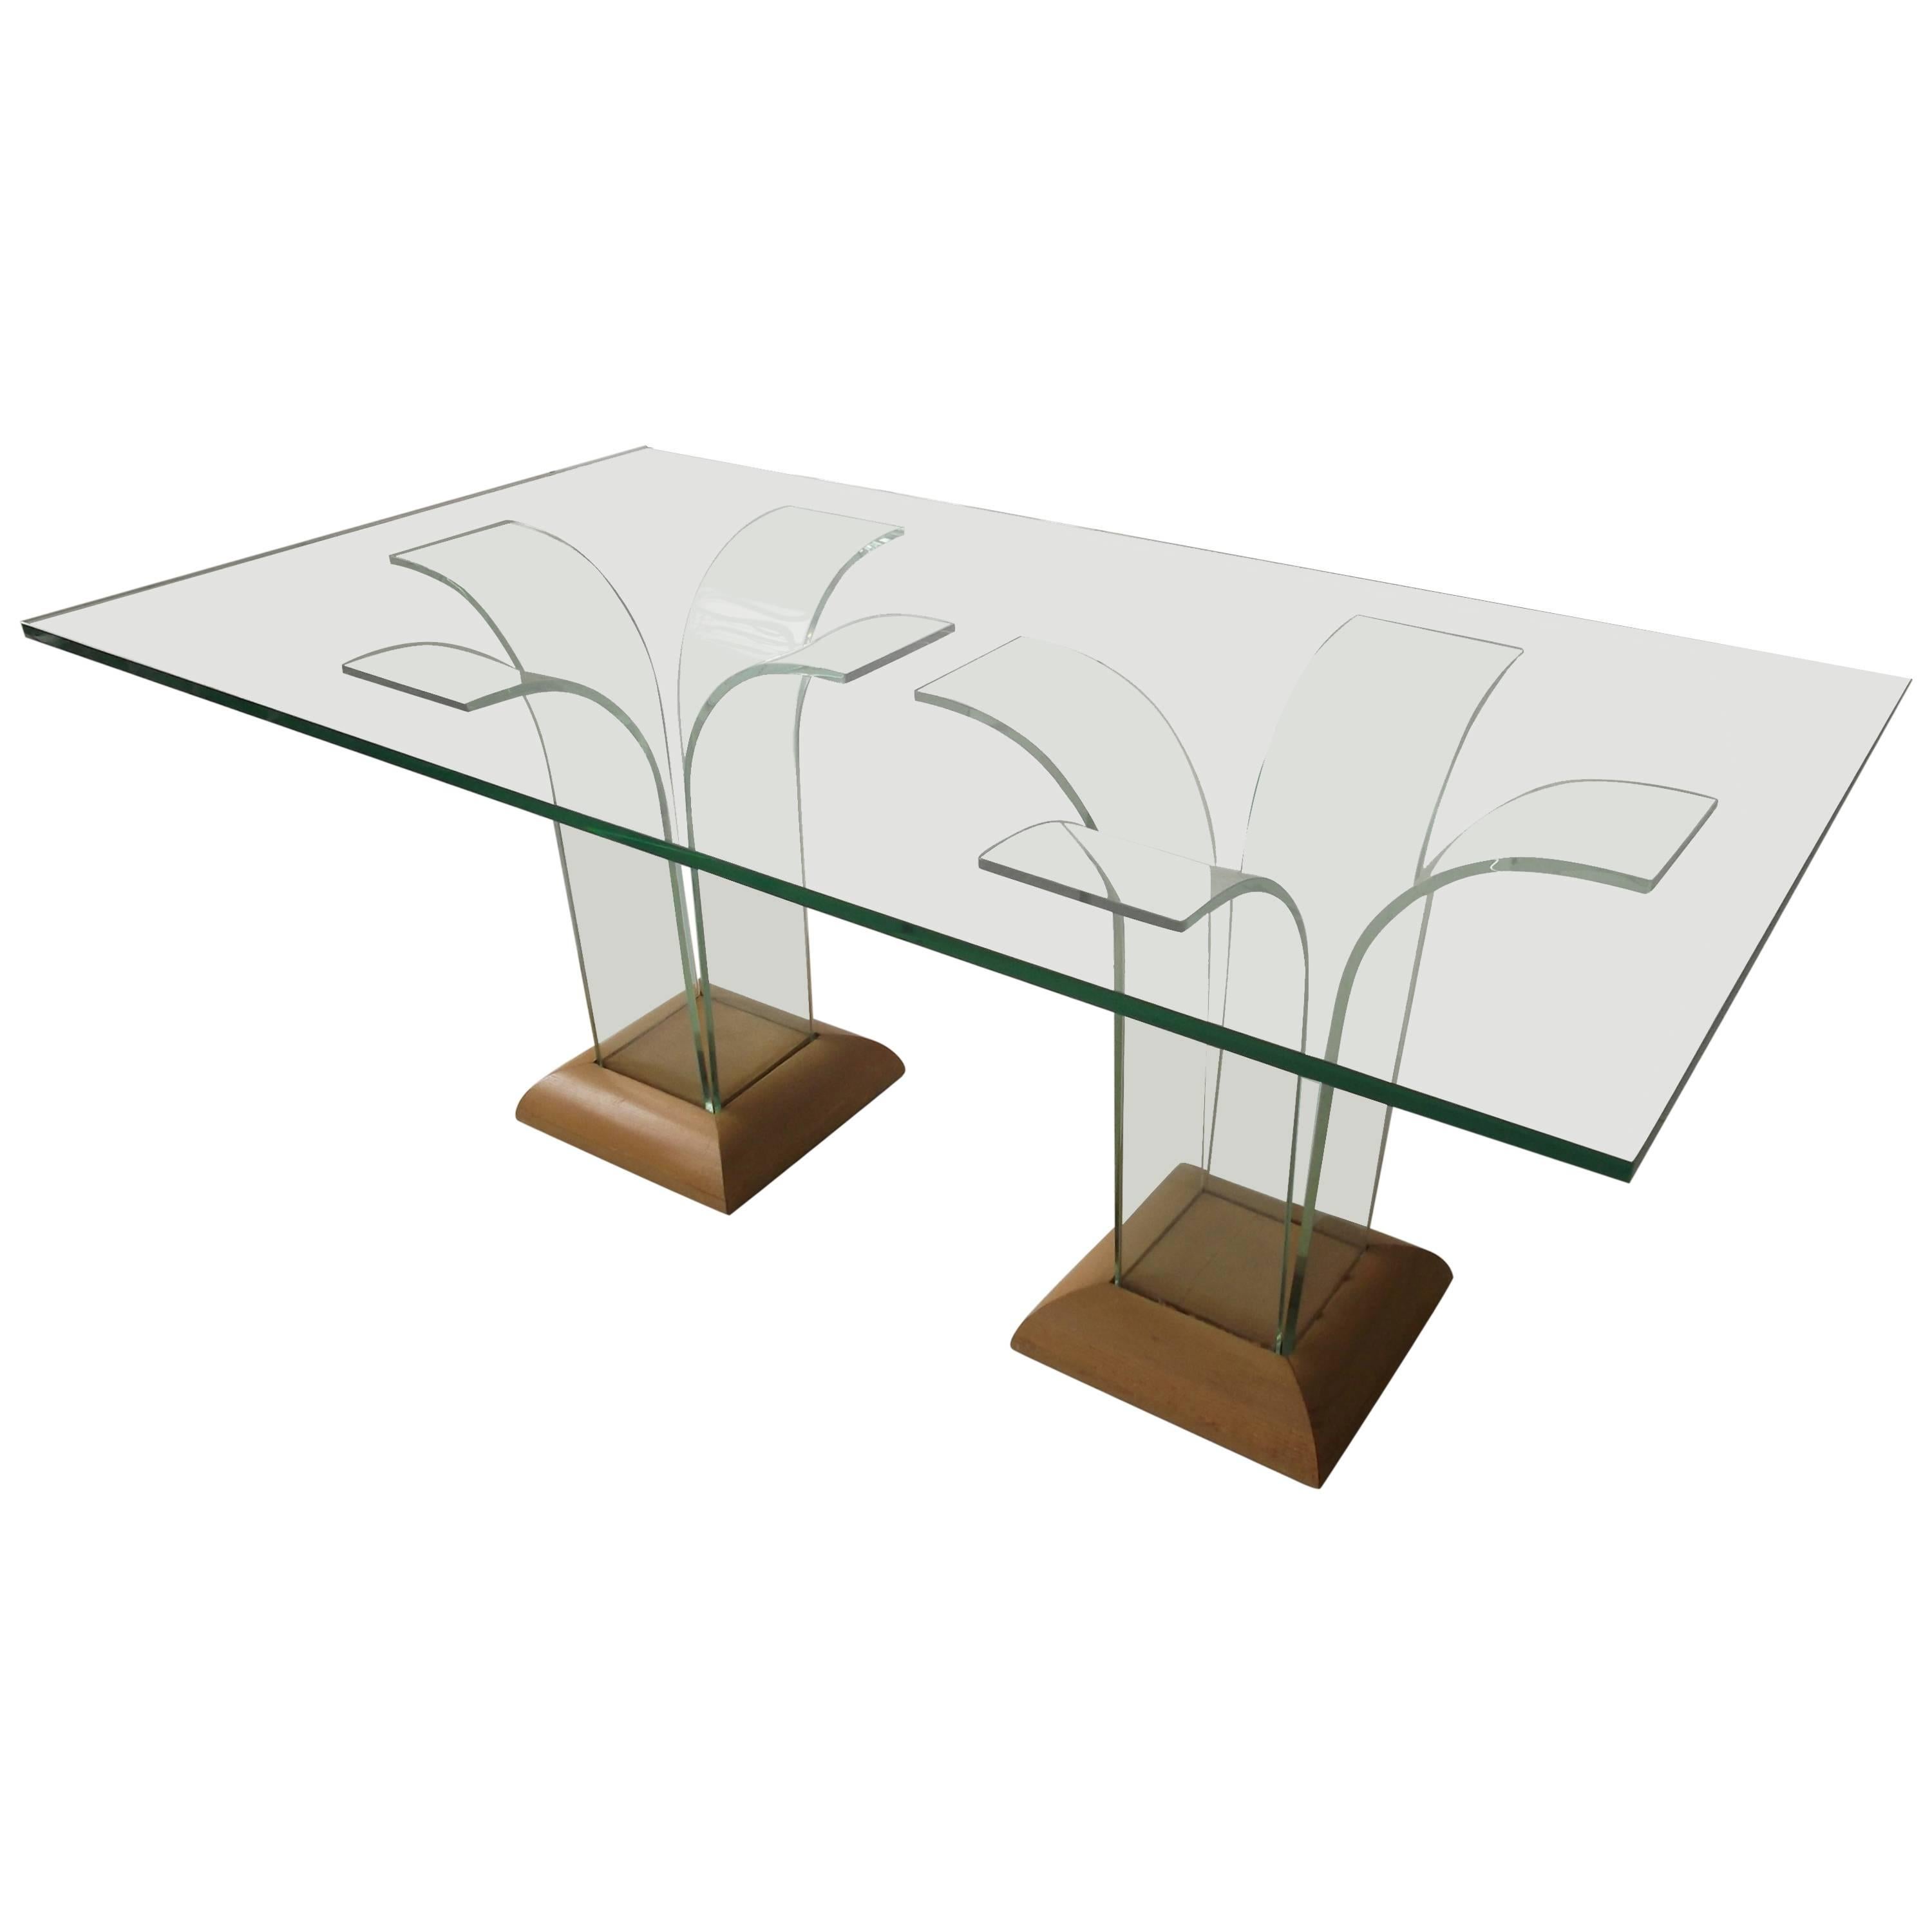 1940 Art Deco Bent Glass Dining Table by Ben Mildwoff for Modernage